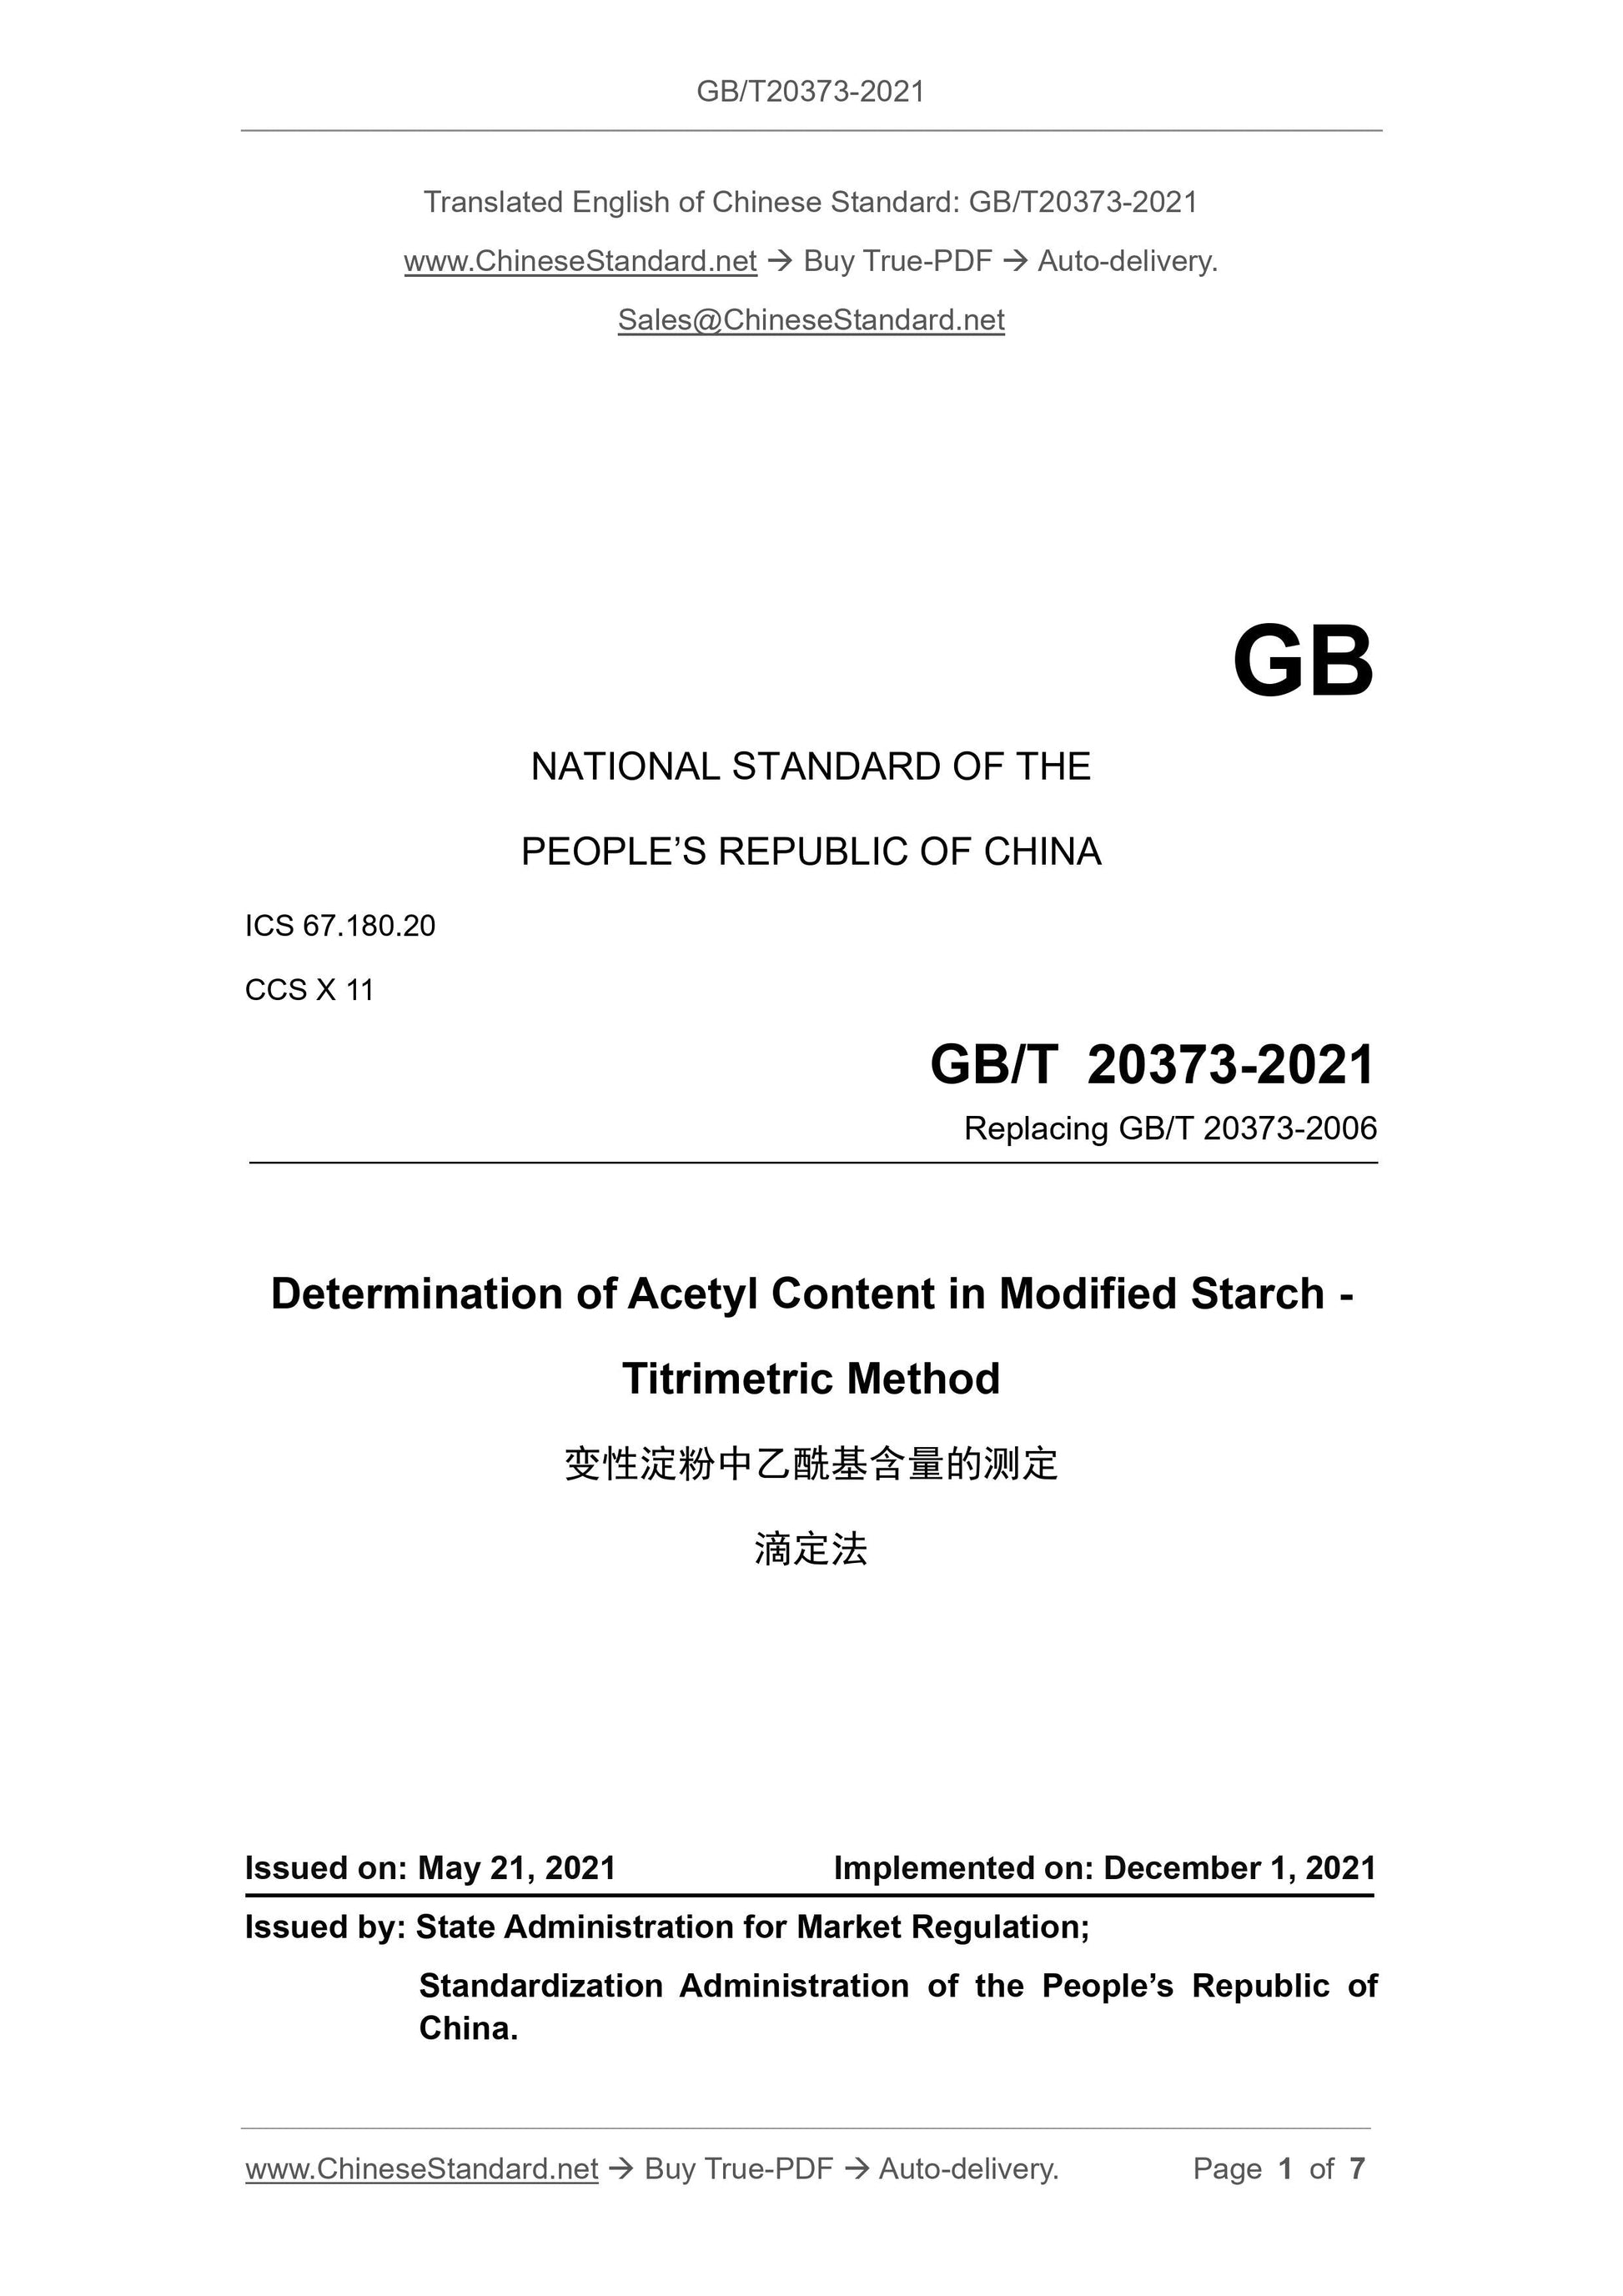 GB/T 20373-2021 Page 1